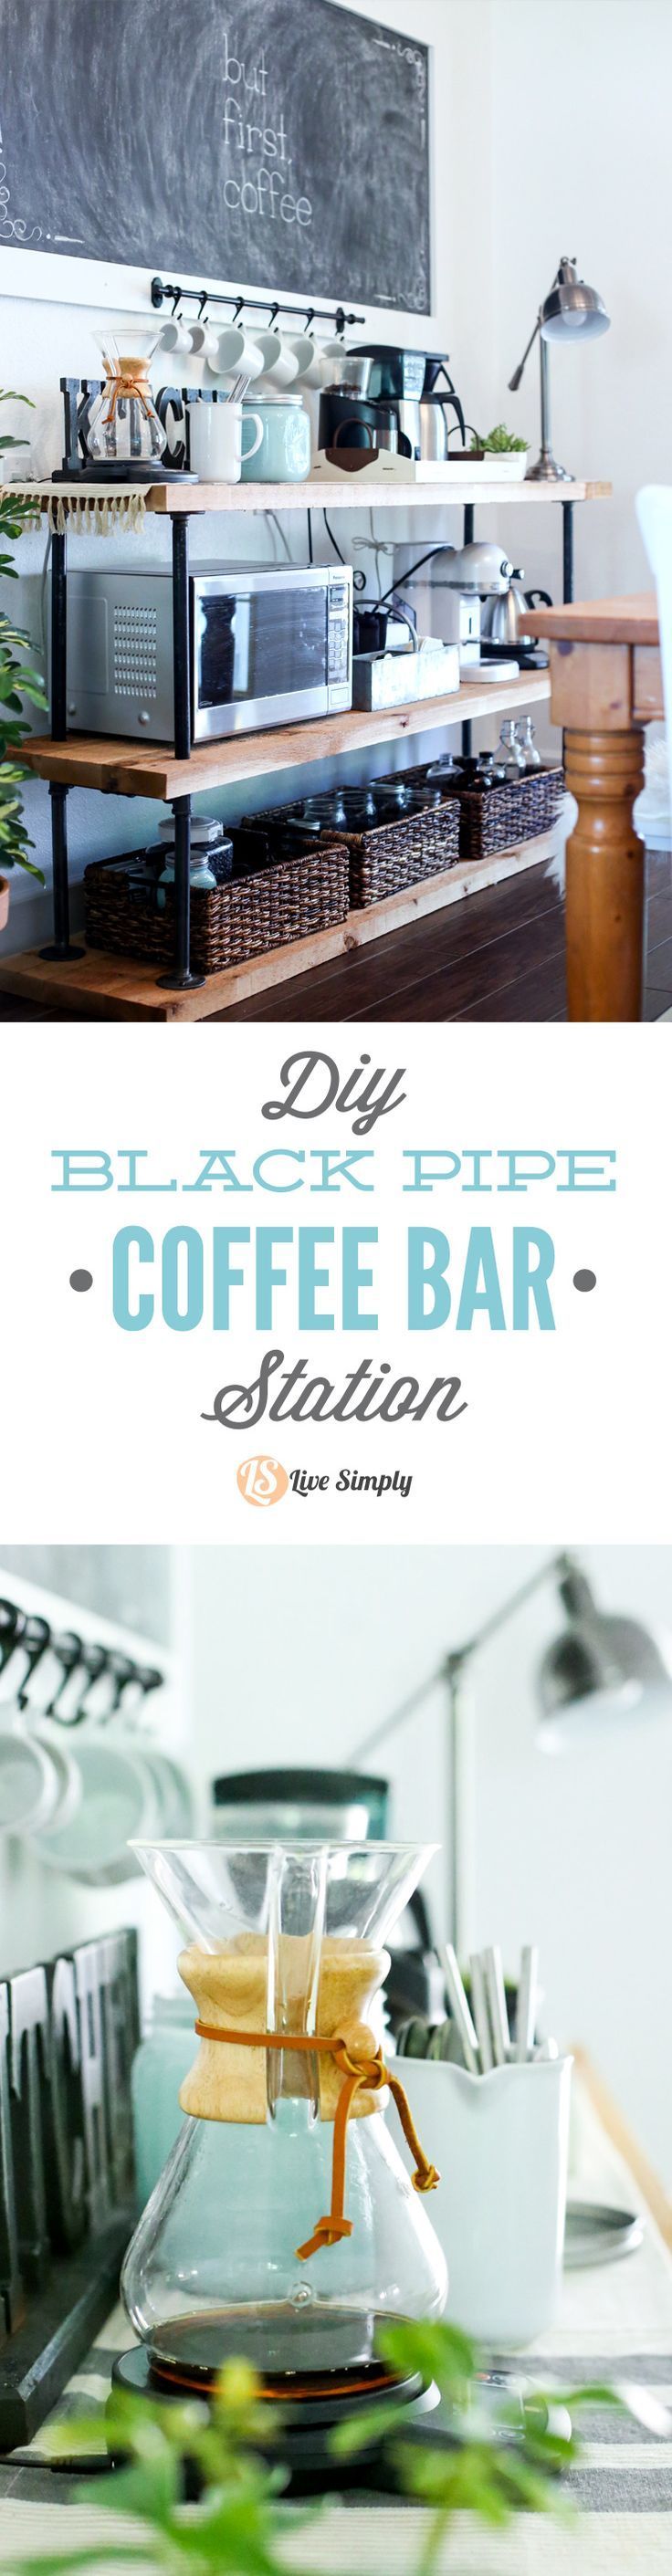 Build your own coffee bar! This project is made with industrial-style black pipes and wood–that’s it! Get that classic coffee bar